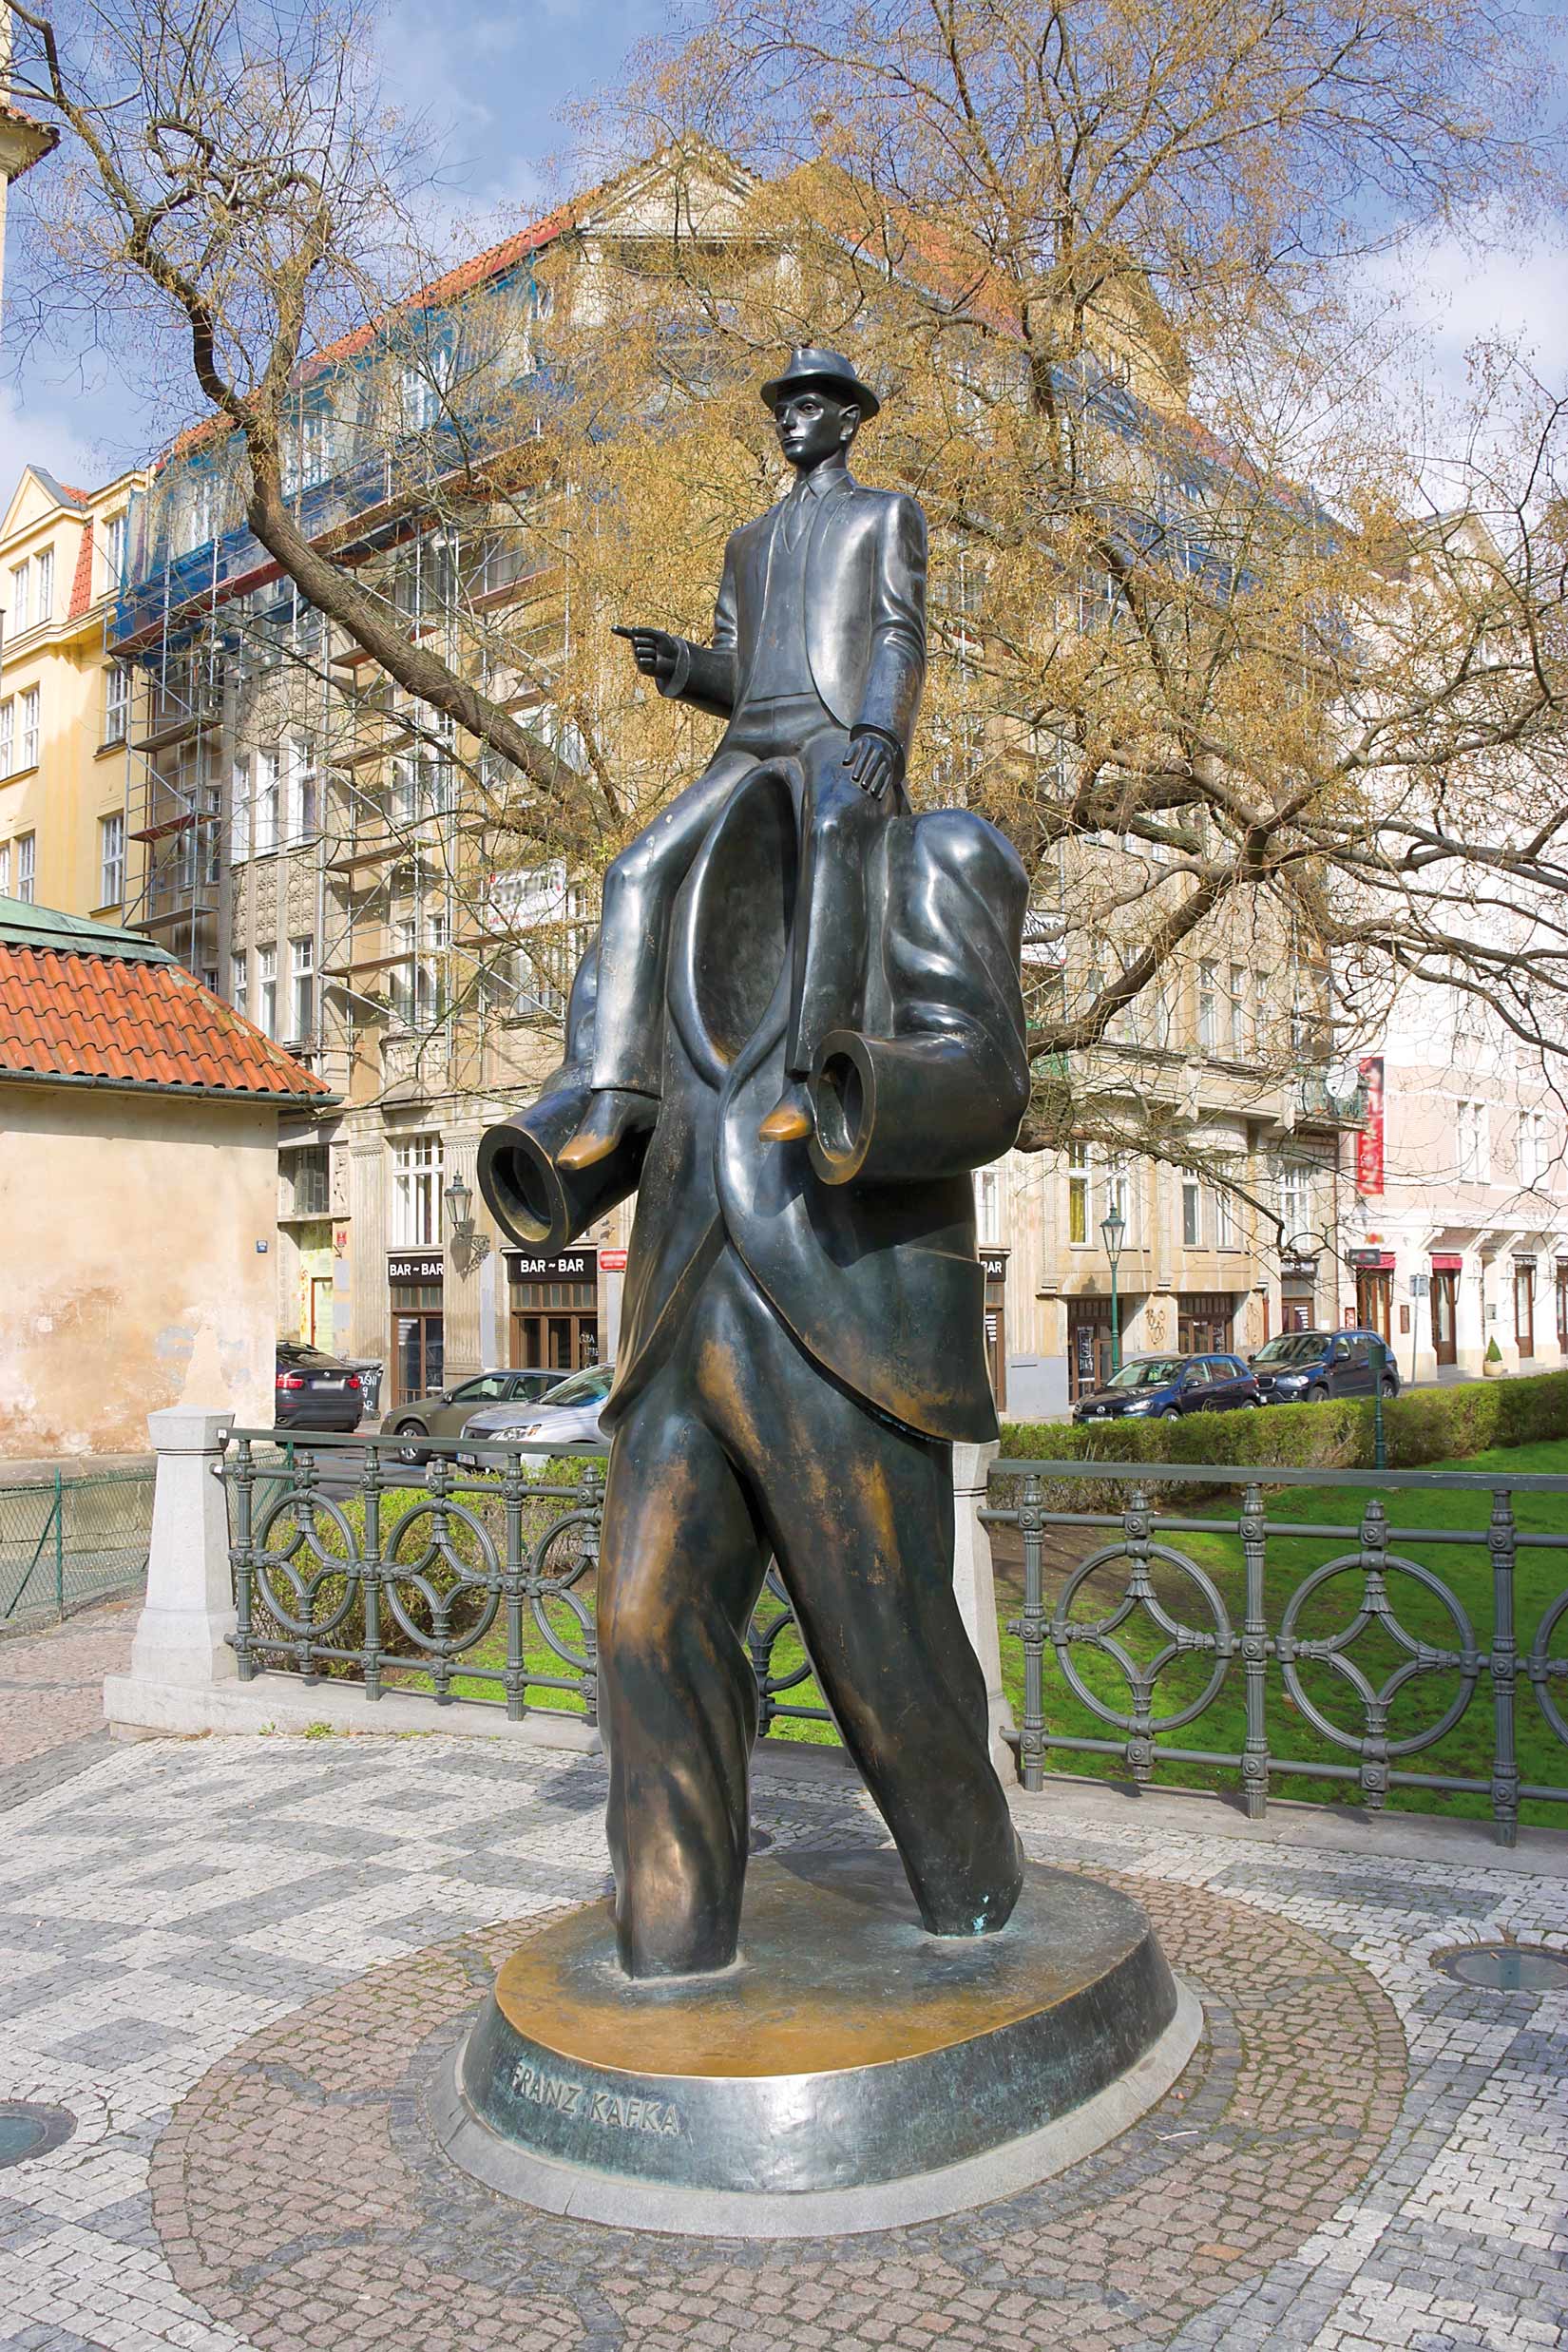 Today Kafka has become an emblem of Prague, commemorated throughout the city. Guides offer tours of “Kafka’s Prague,” in which this bronze statue by Jaroslav Rona – based on Kafka’s Description of a Struggle – is a highlight. Its location near Prague’s Spanish synagogue is also the area where Kafka lived most of his life 